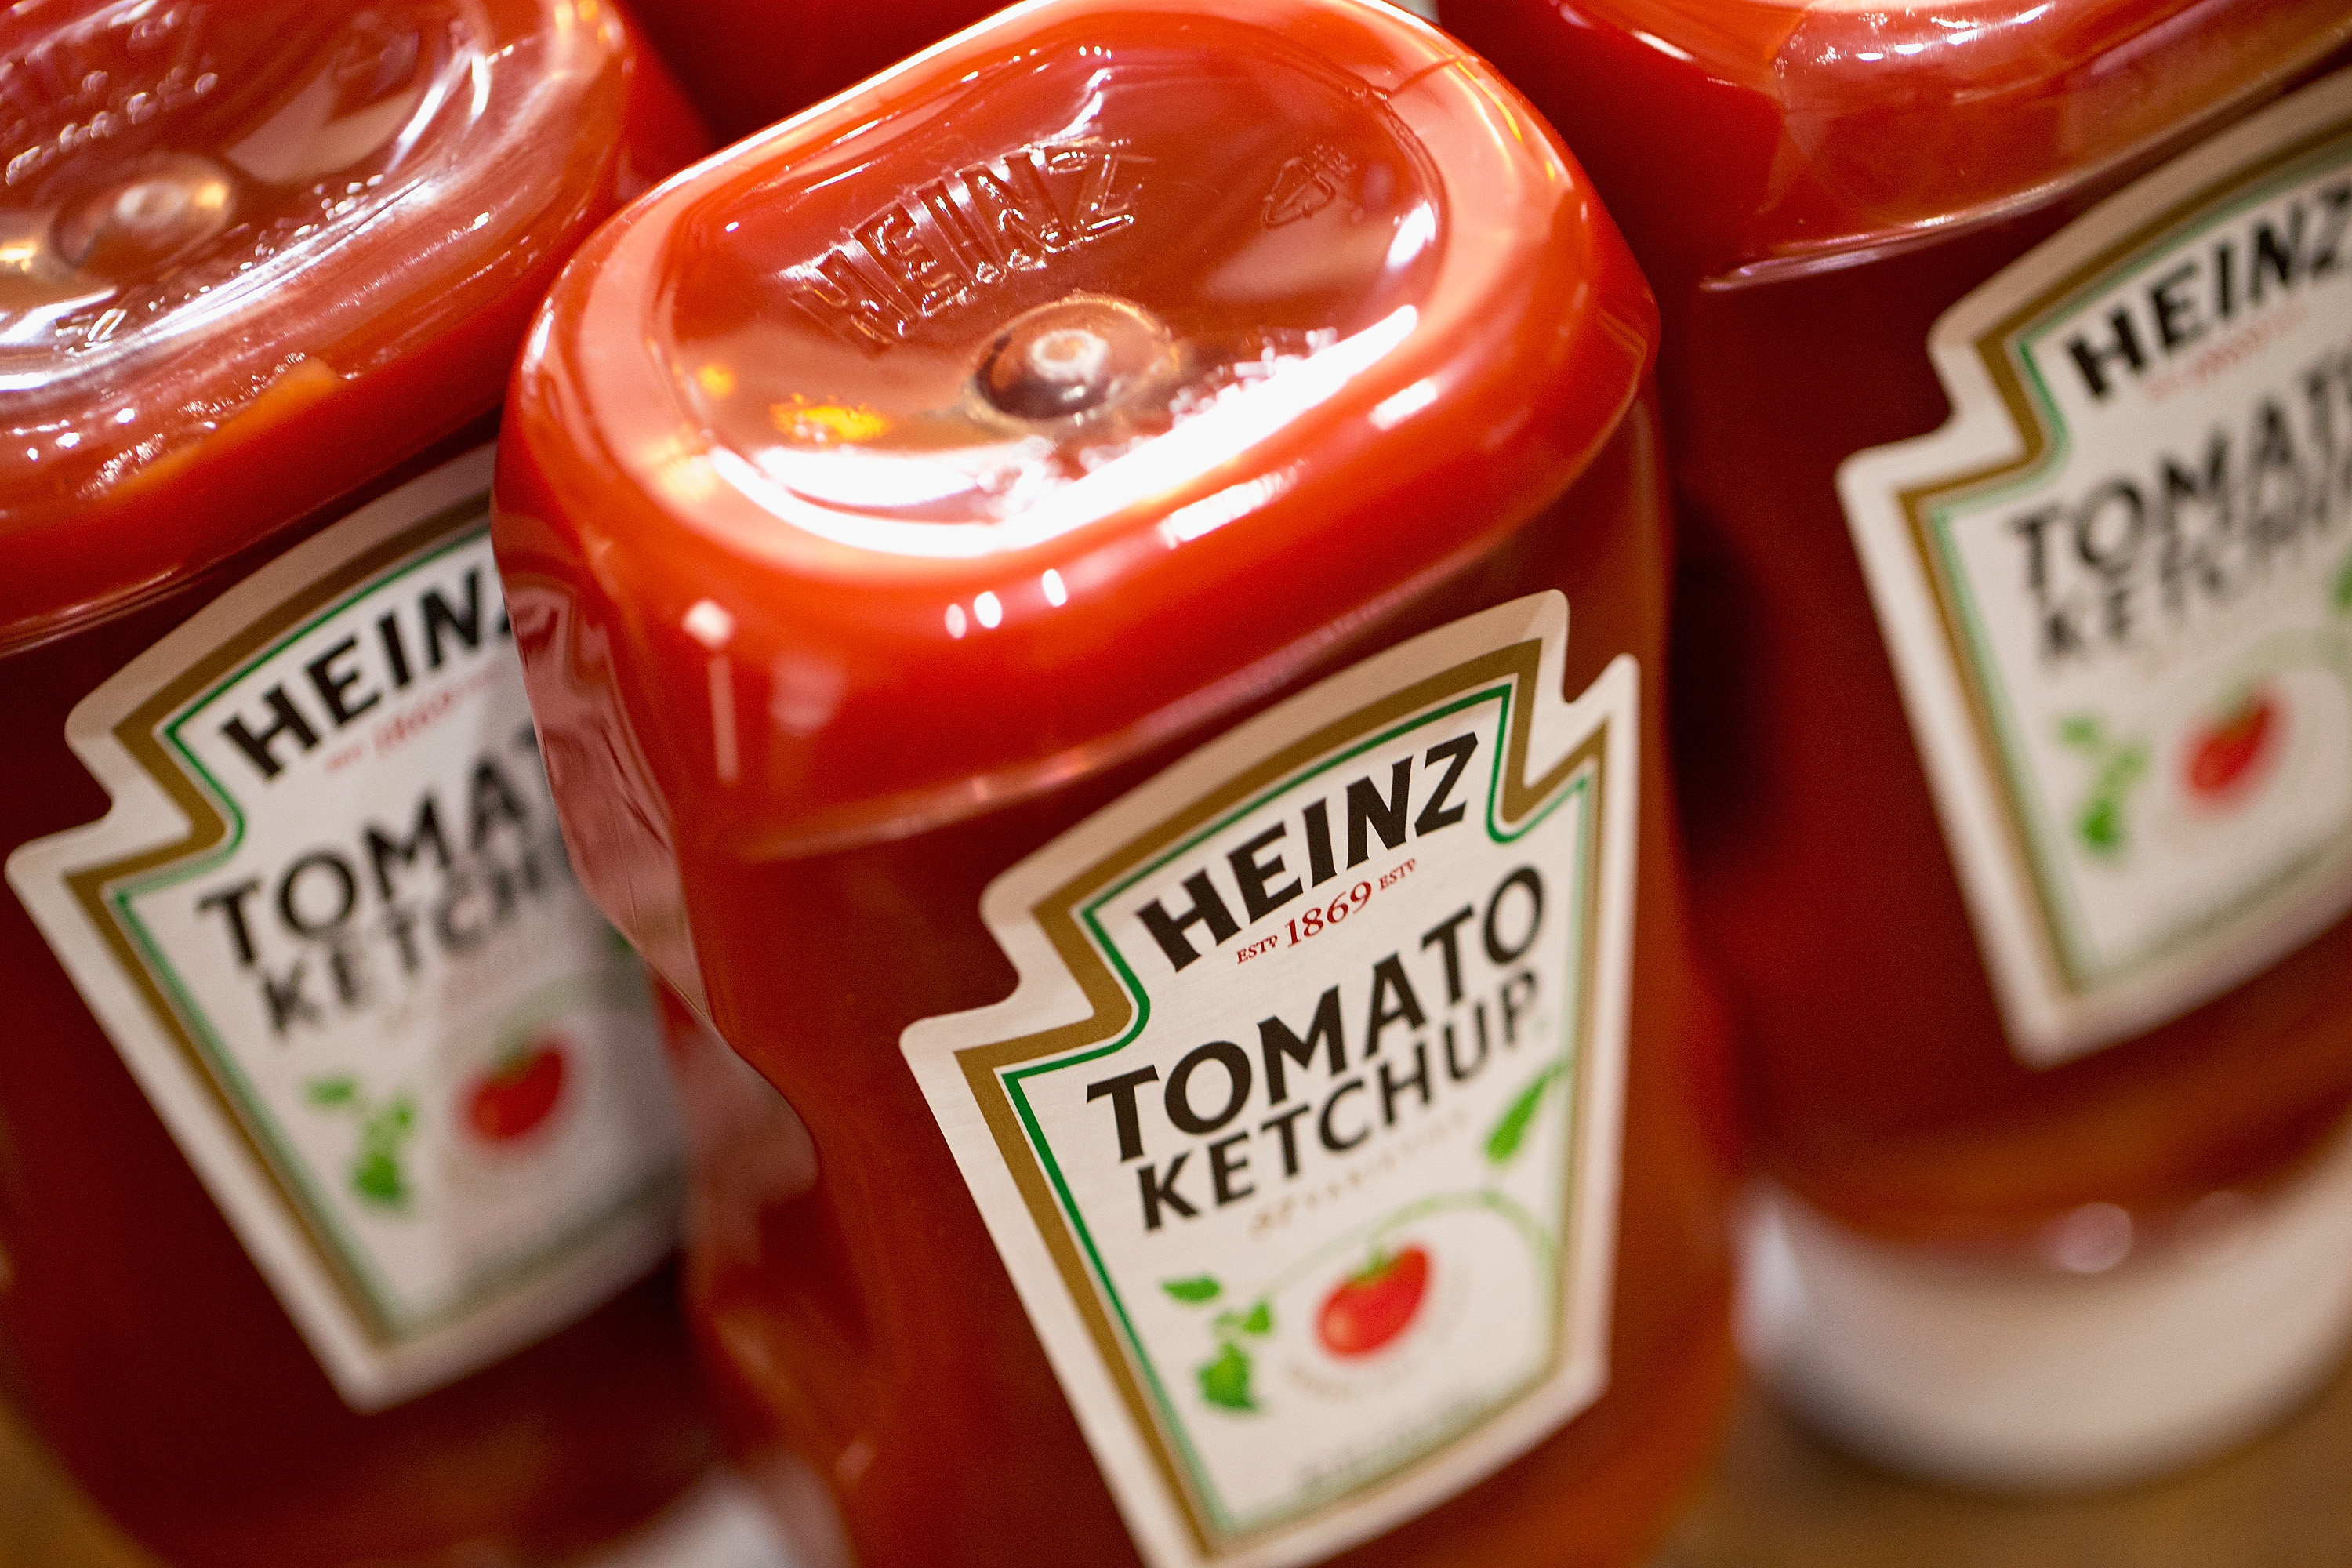 Close-up of three bottles of Heinz tomato ketchup.